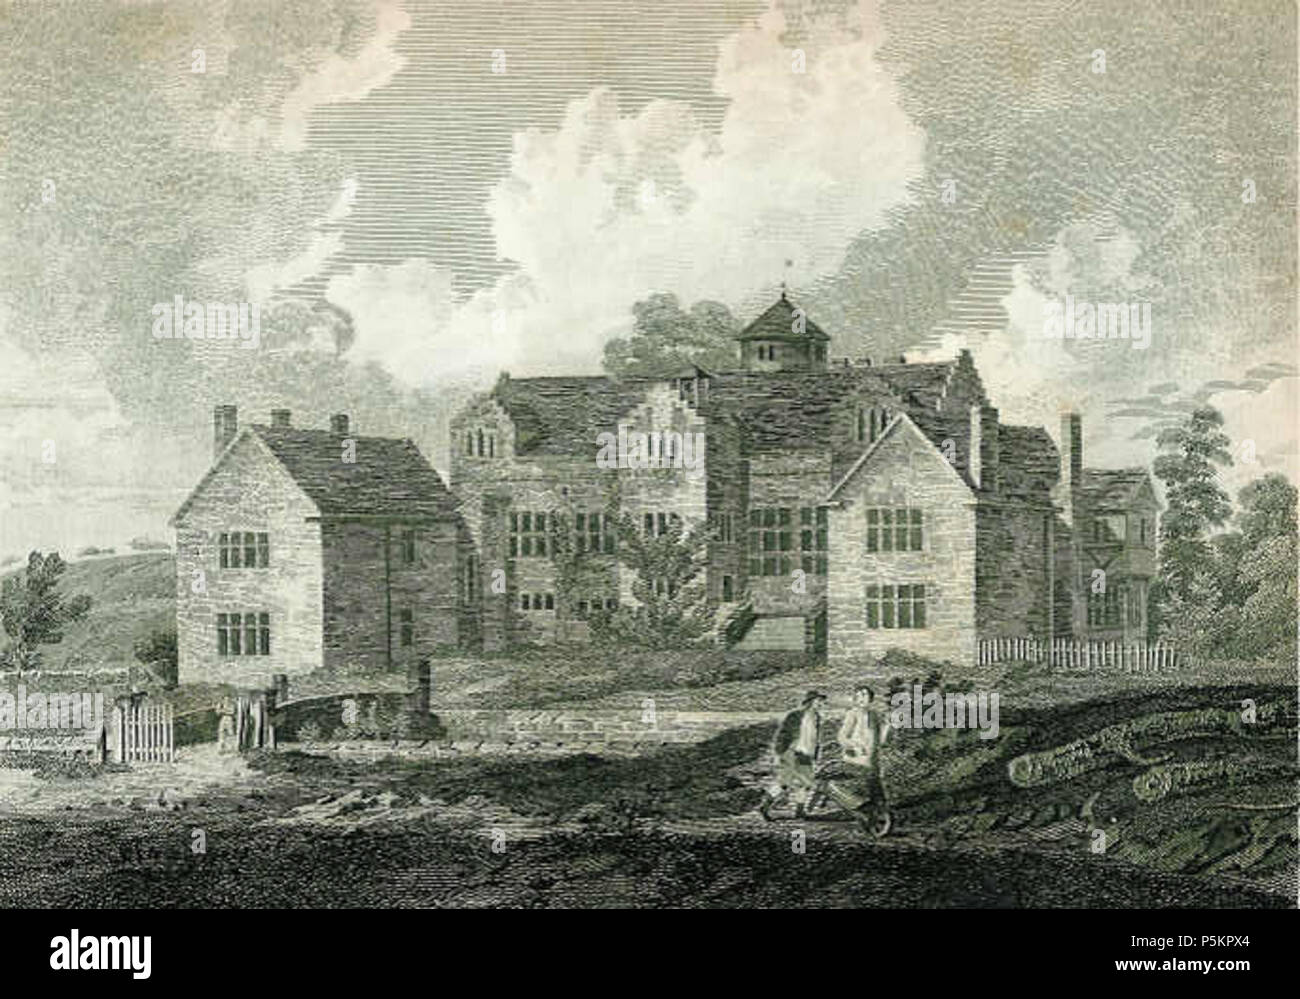 N/A. English: An engraving of Harden Hall, Bredbury, Greater Manchester, dated 1794. The modern name is Arden Hall. I scanned this image at 75 dpi. The original is about 6 inches across. . Mr Stephen 21:26, 26 March 2006 (UTC) 121 Arden Hall Stock Photo